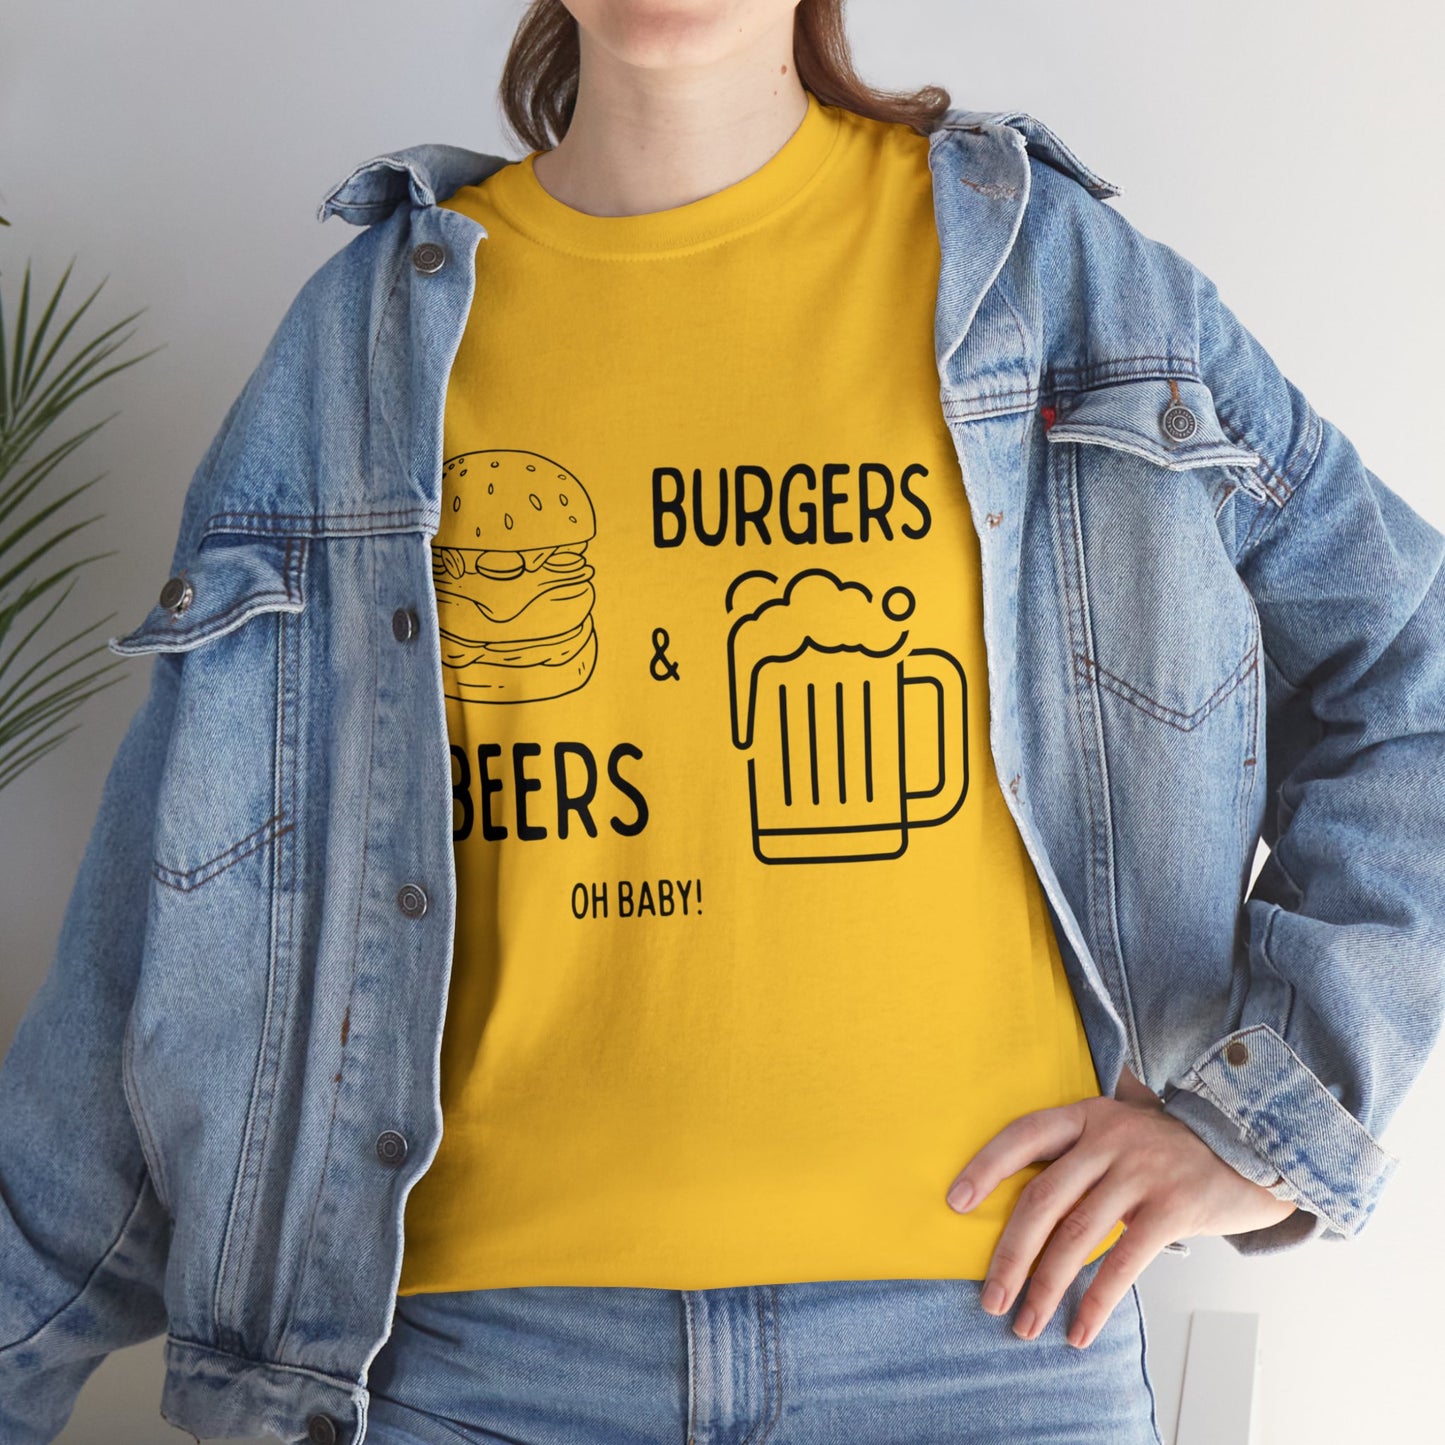 Burgers and Beers Oh Baby! T Shirt